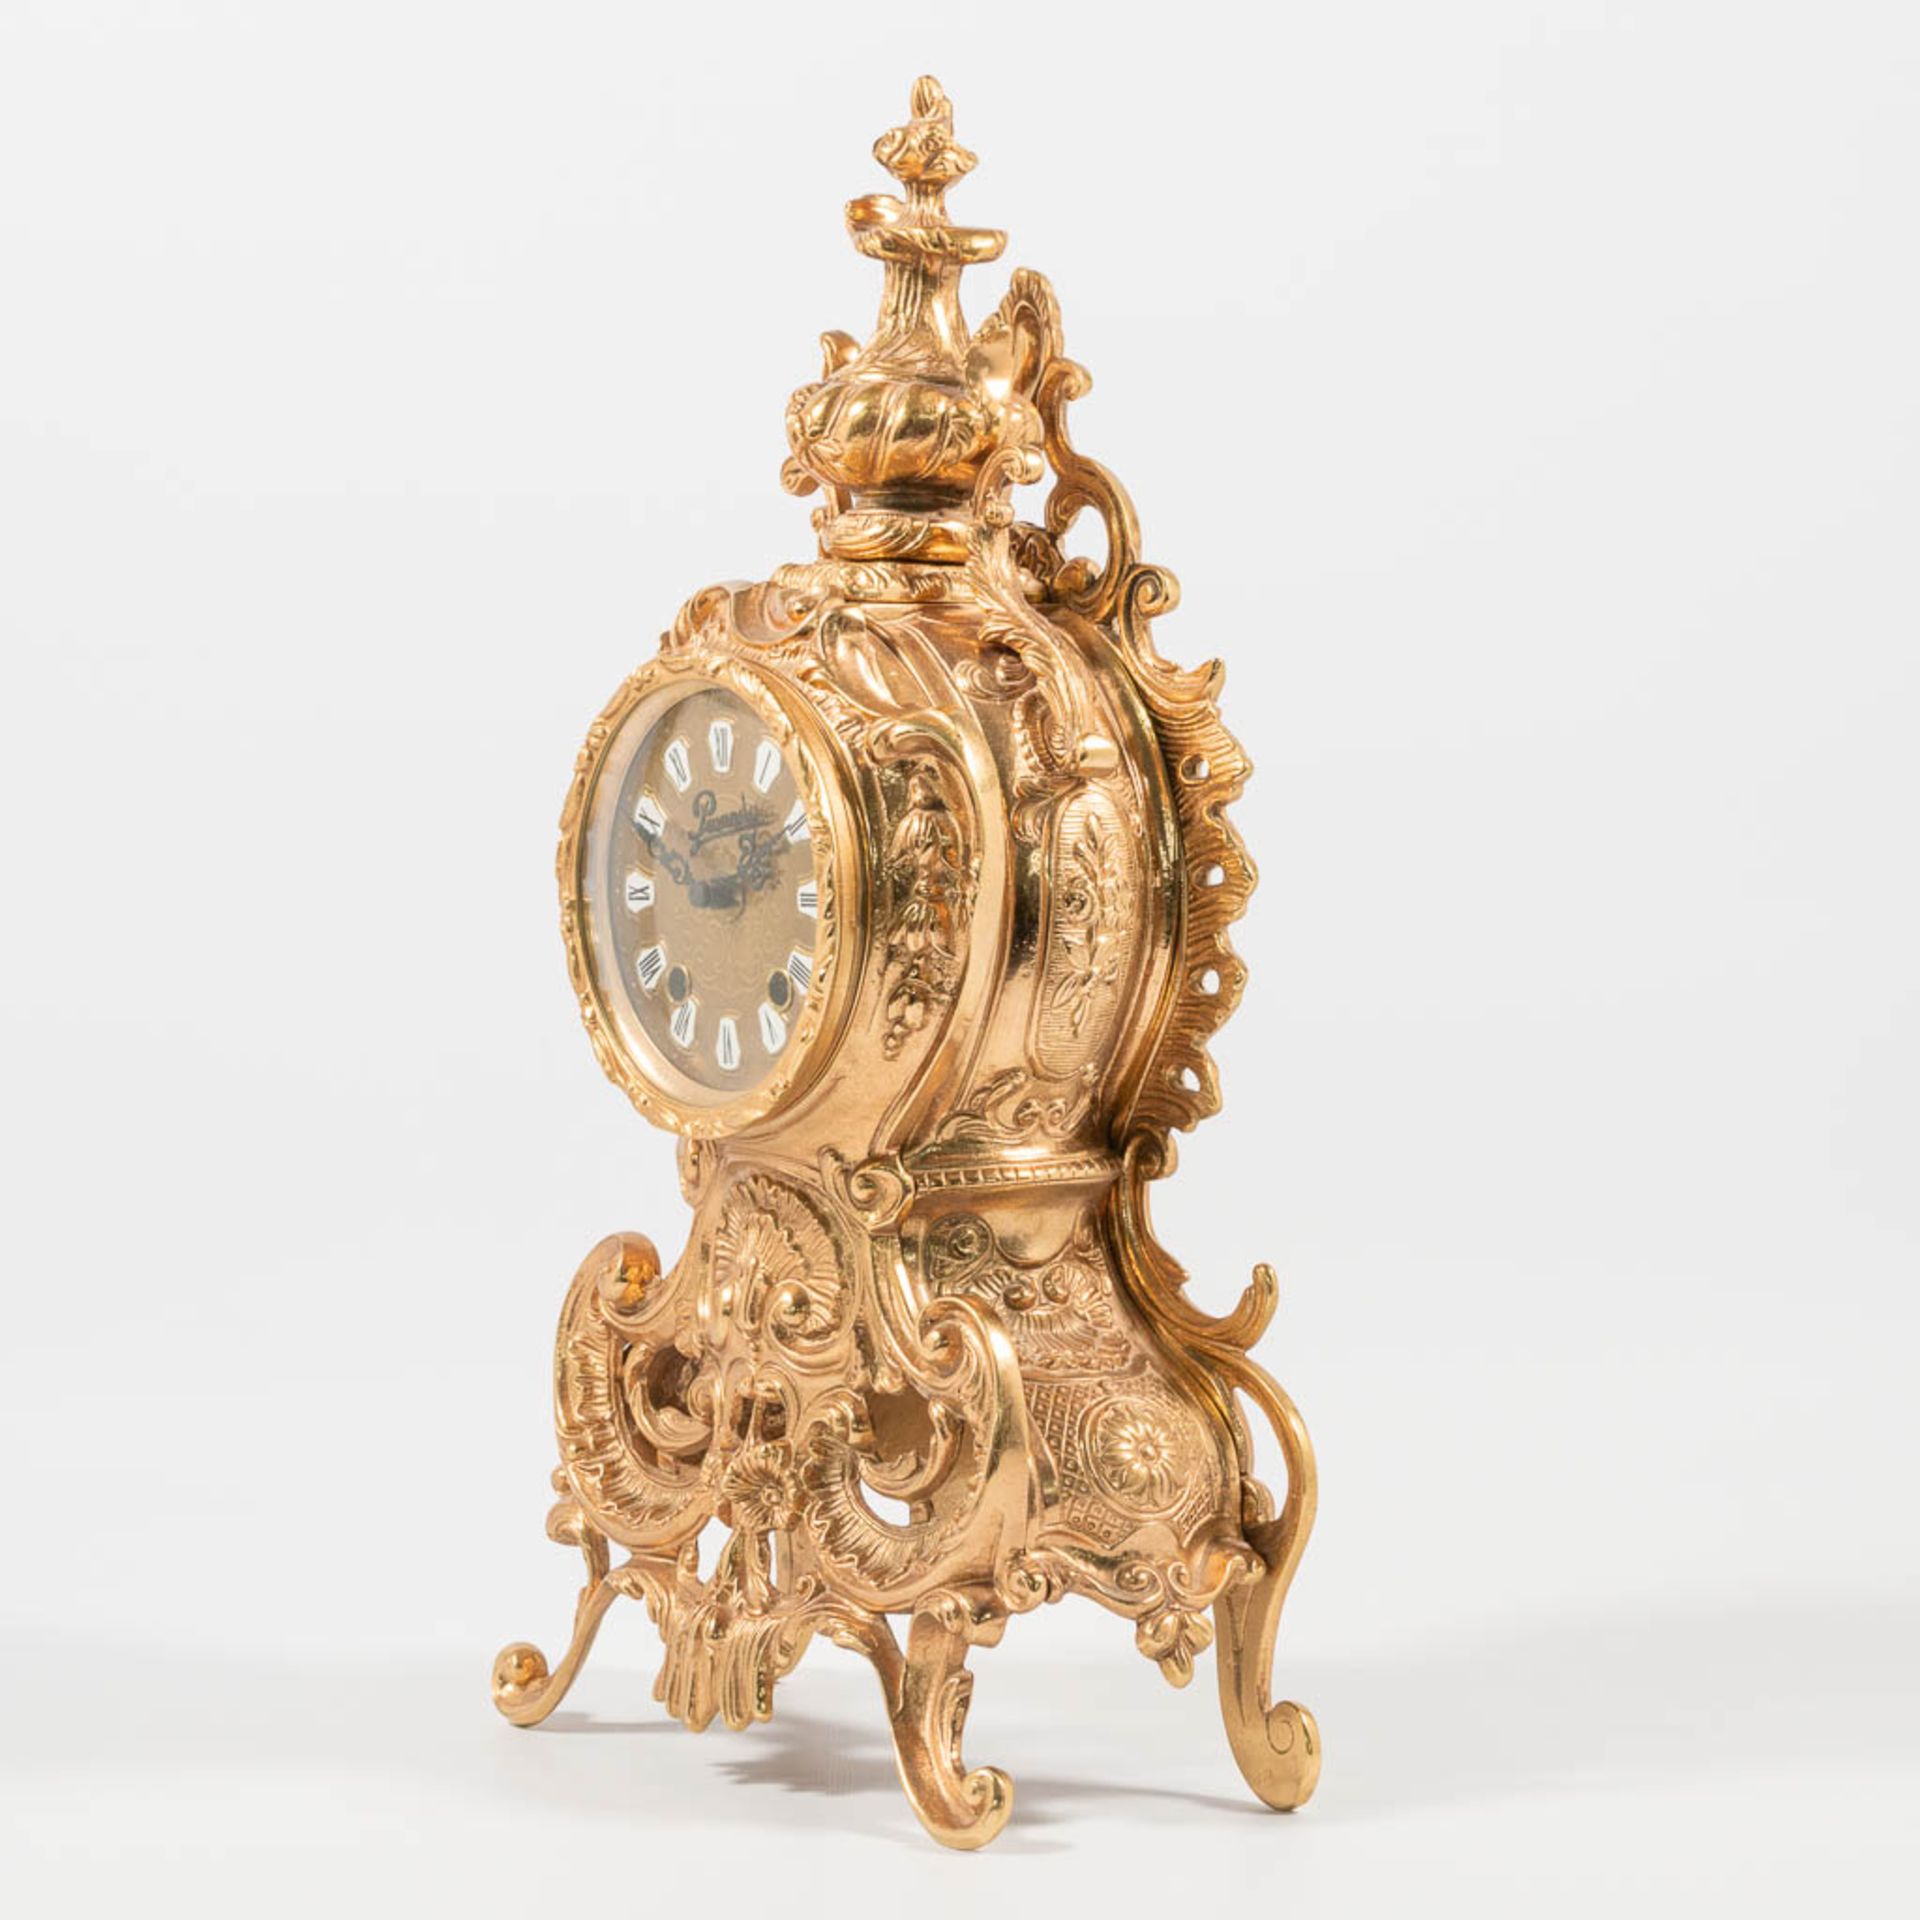 A vintage bronze clock 'Pevanda' with mechanical movement, made around 1970. - Image 6 of 19